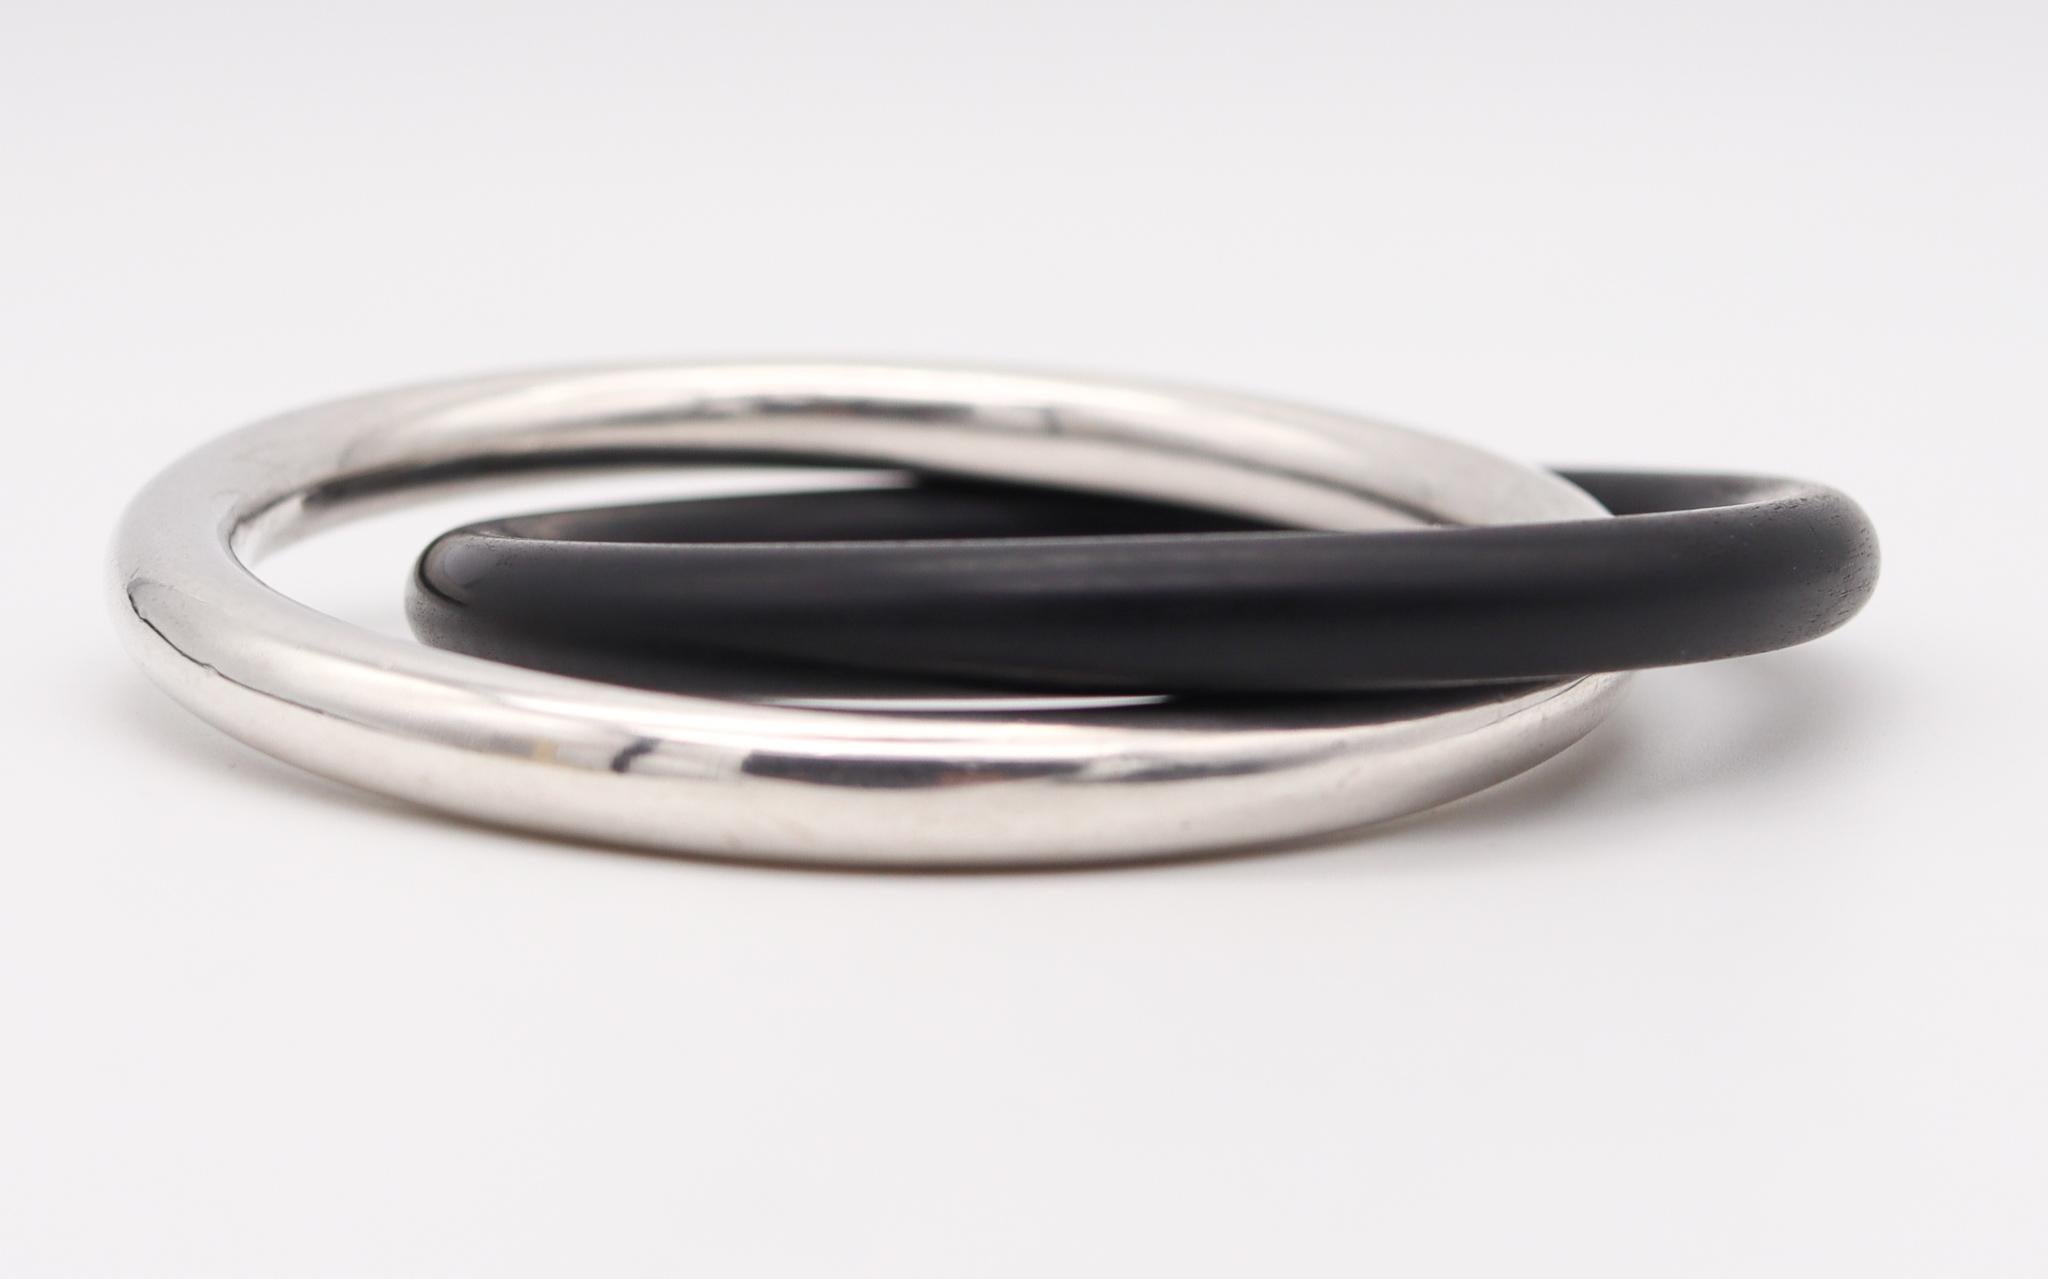 Modernist Tiffany & Co. 1975 Elsa Peretti Double Bangles in Sterling Silver and Ebony Wood